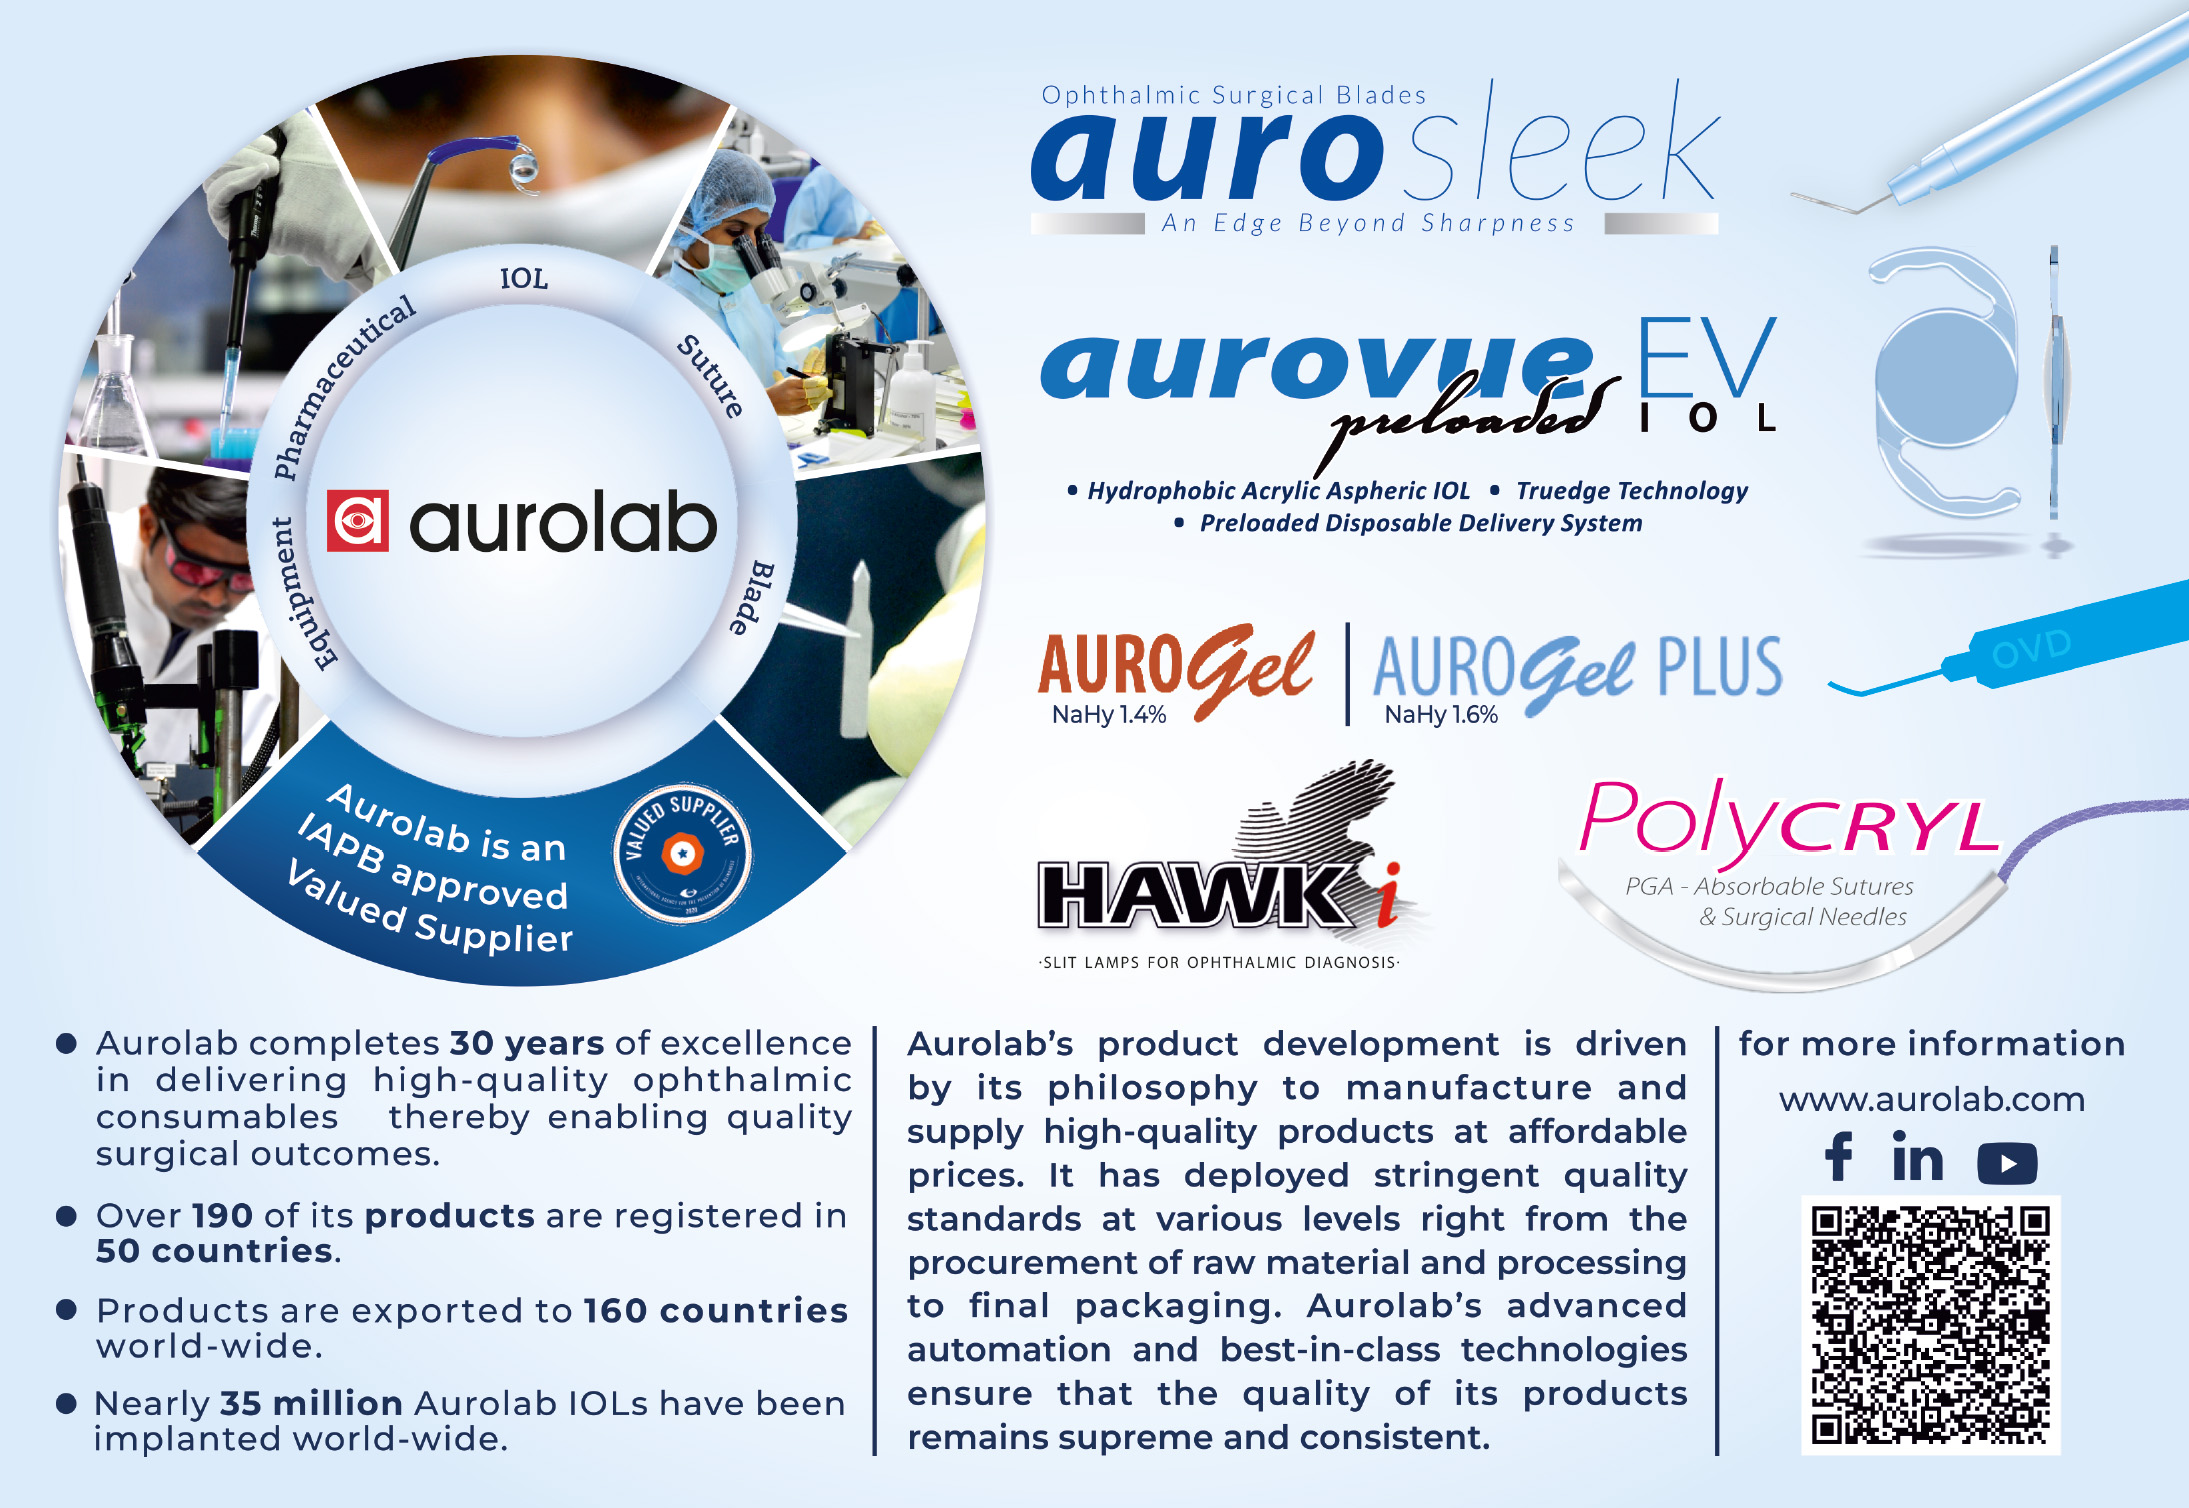 An advert for Aurolab - listing some of their products